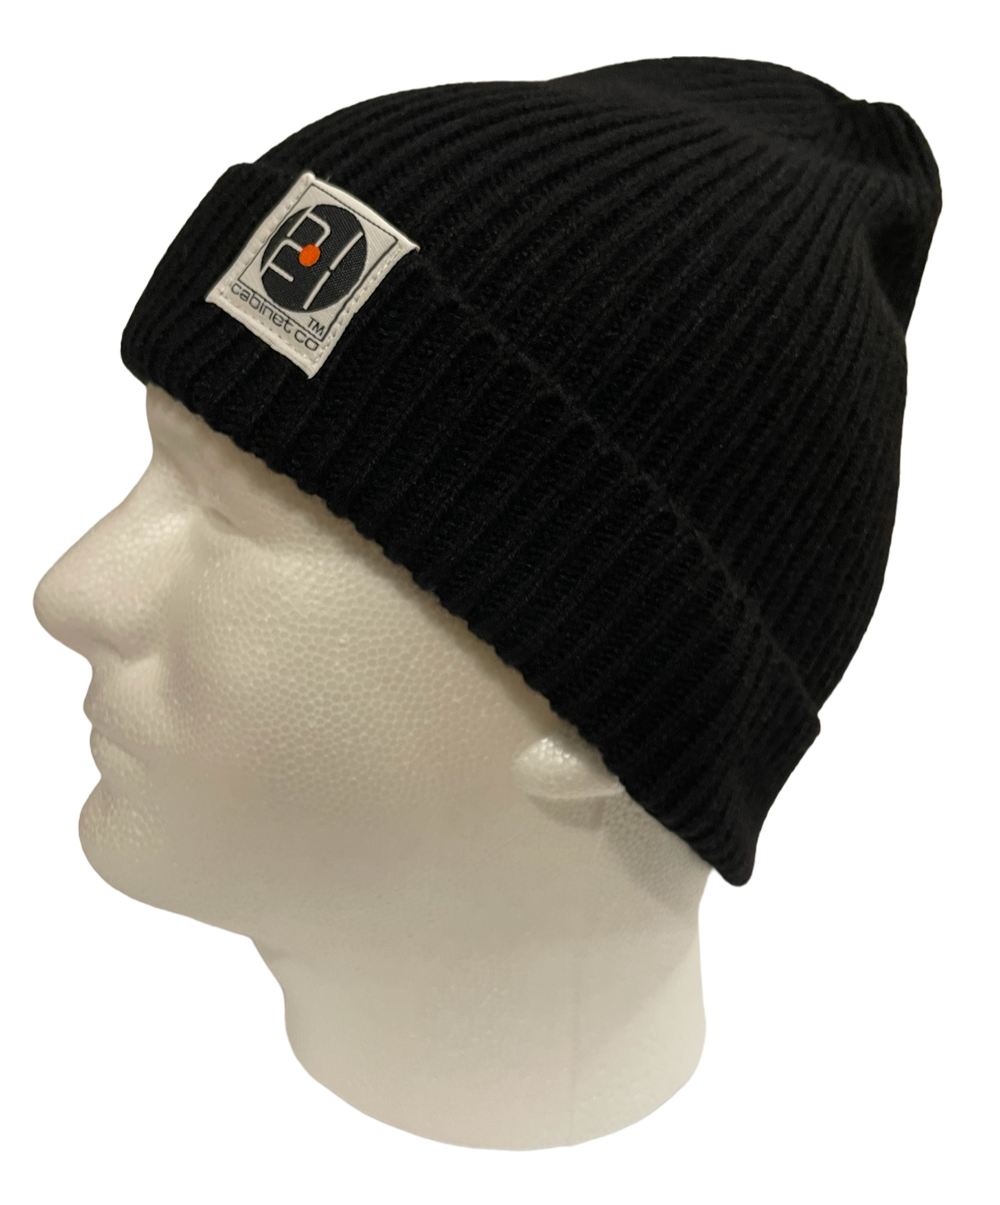 Radyan's Sustainable Beanie-Style 50/50 recycled polyester/acrylic